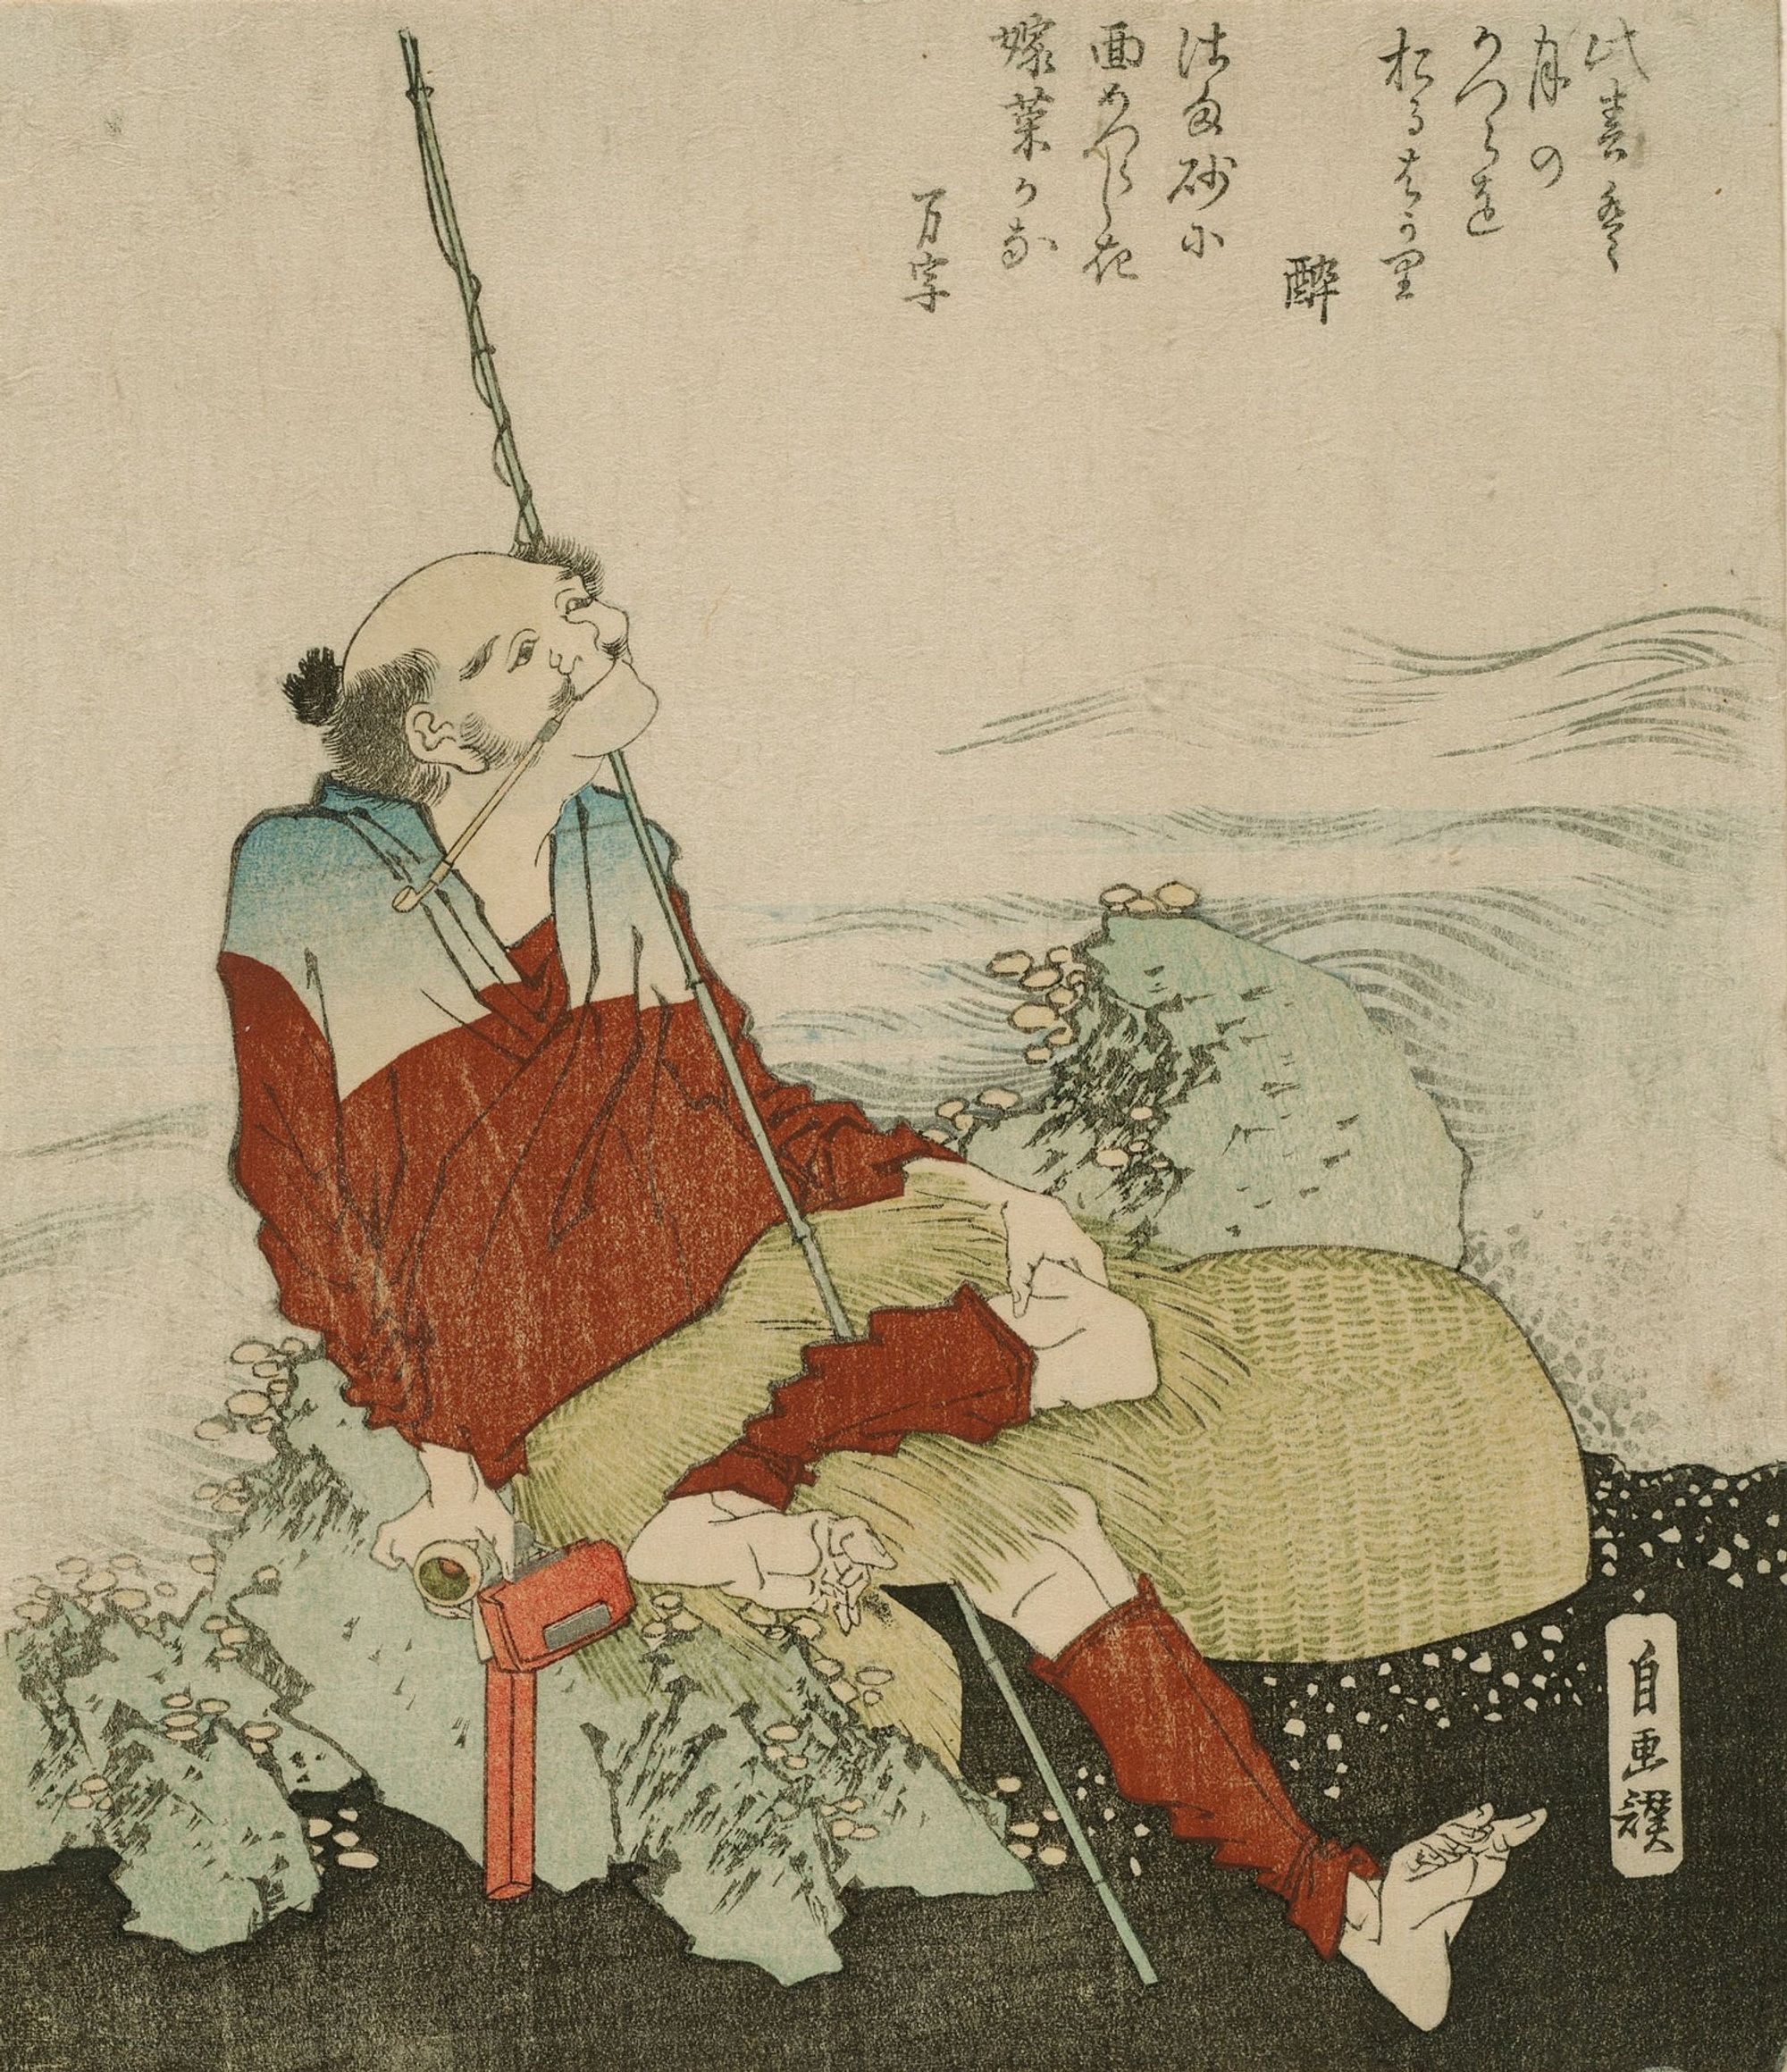 An old men grins while seated, resting his feet.